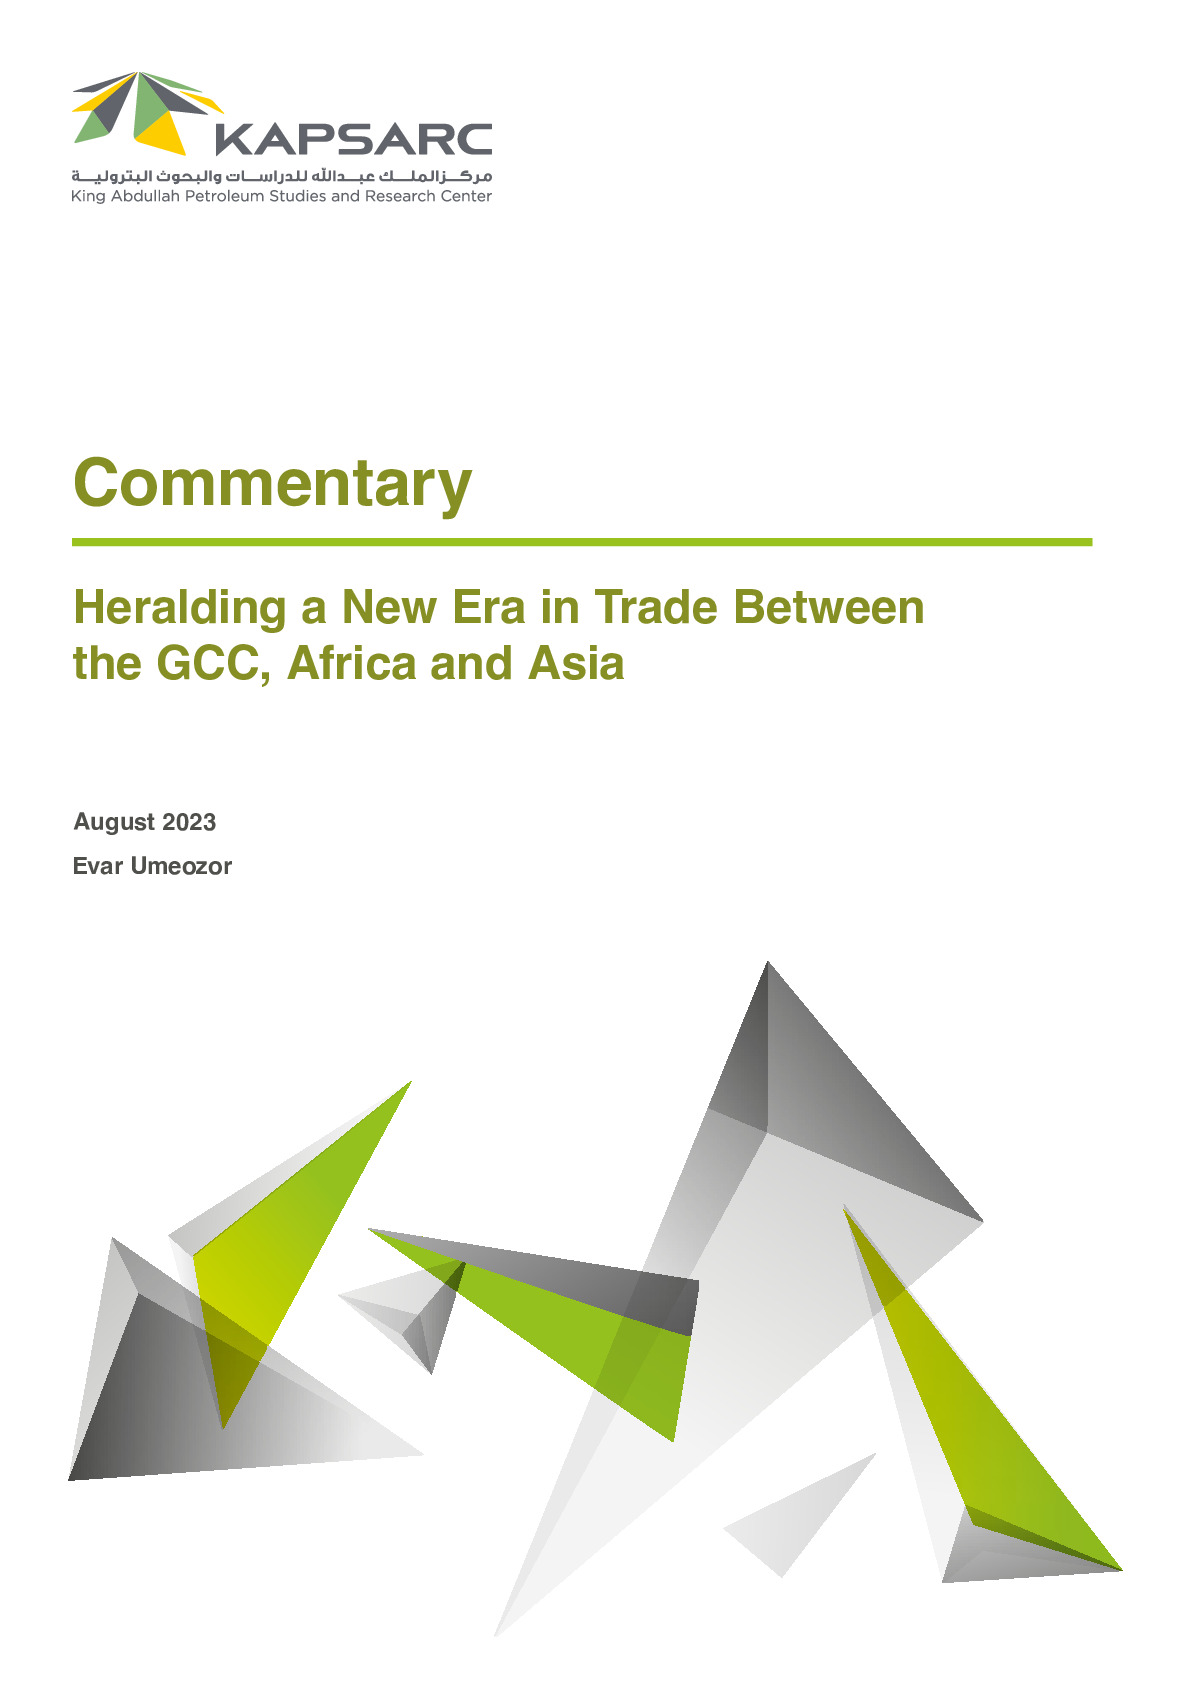 Heralding a New Era in Trade Between the GCC, Africa and Asia